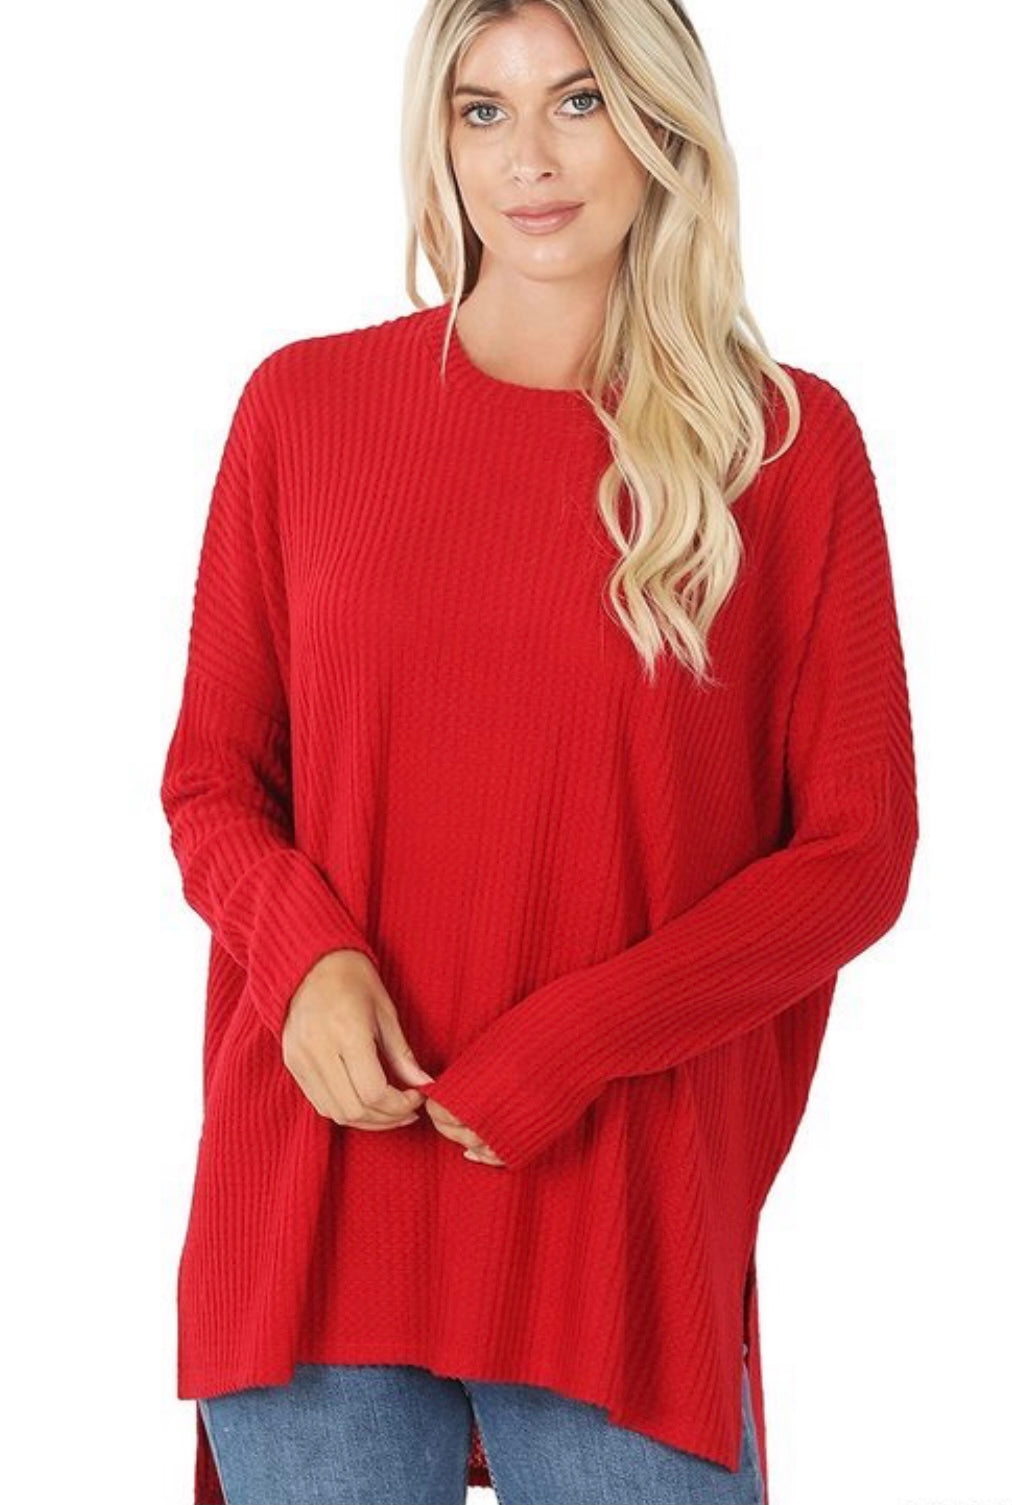 Selah Brushed Thermal Sweater - Corinne Boutique Family Owned and Operated USA